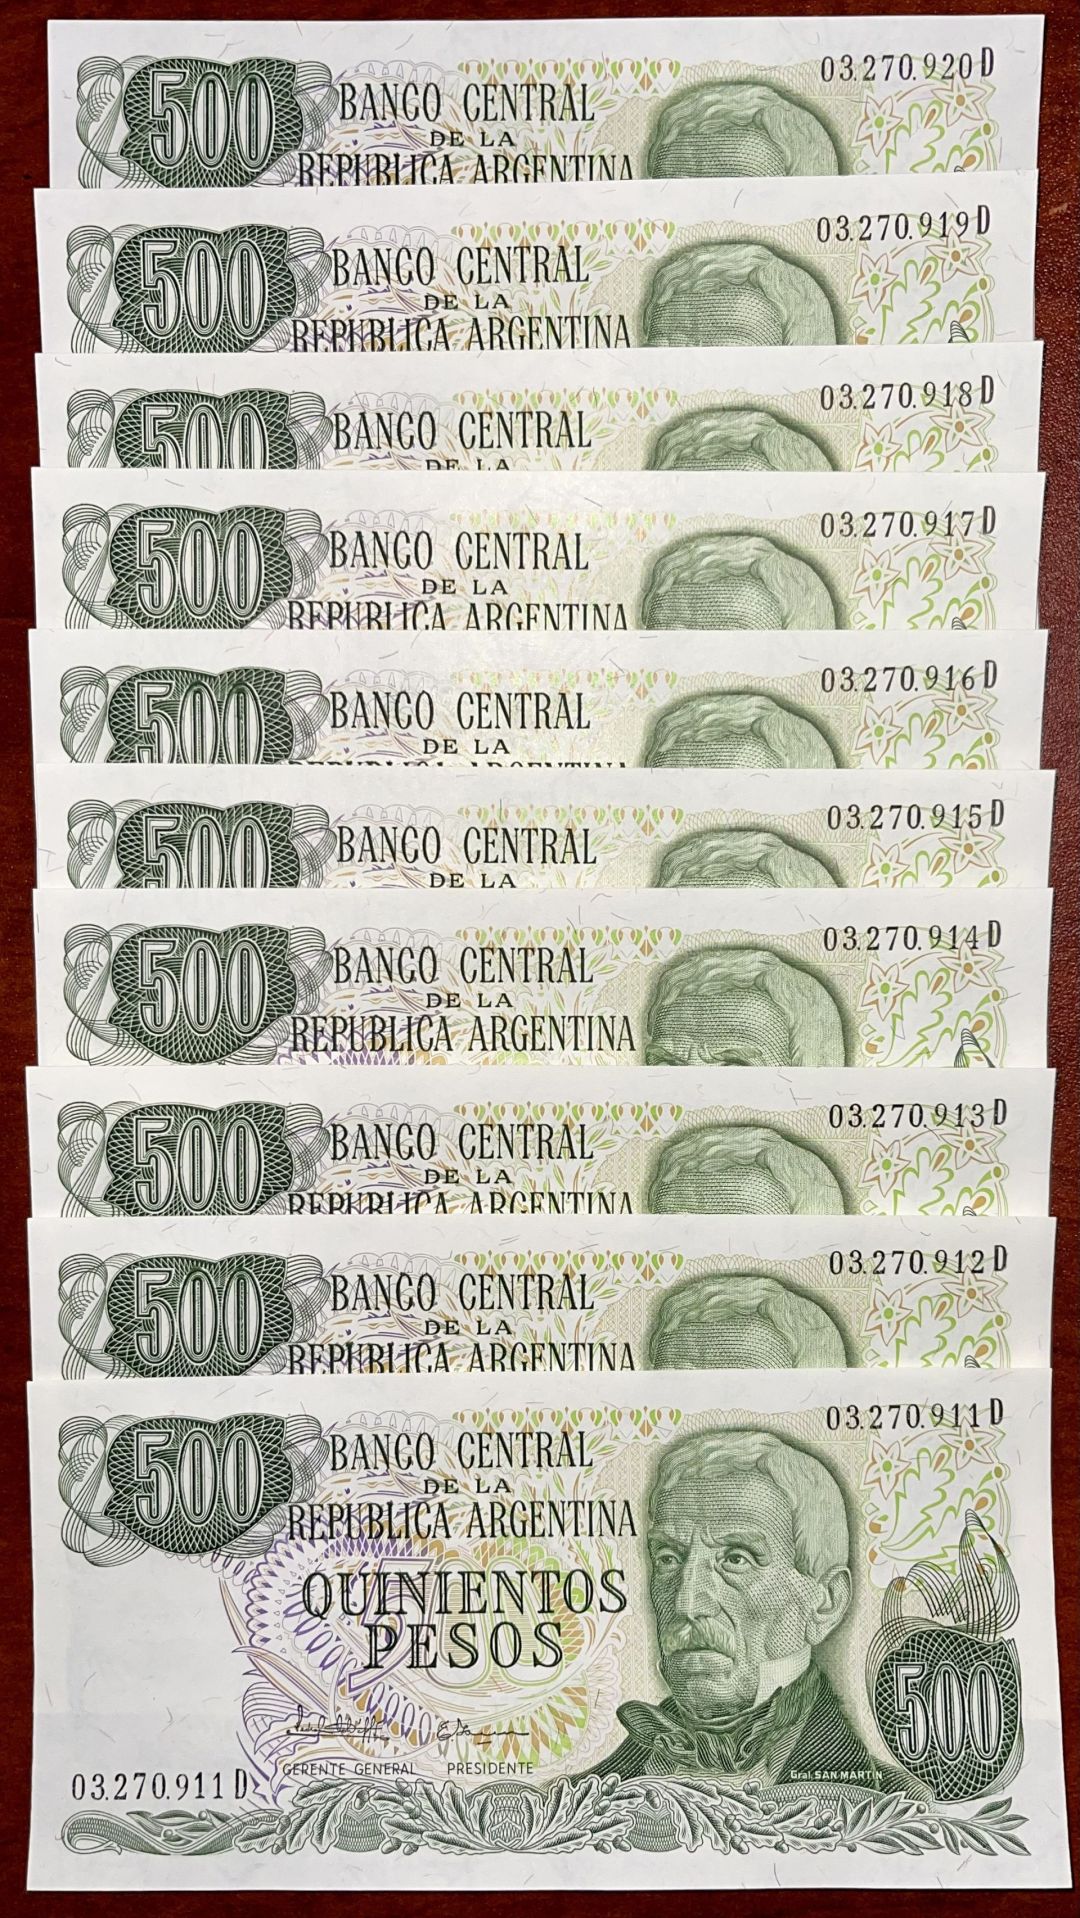 Argentina - Pick-303c - Group of 10 notes - 500 Argentine Pesos - 1977-1982 dated Foreign Paper Money